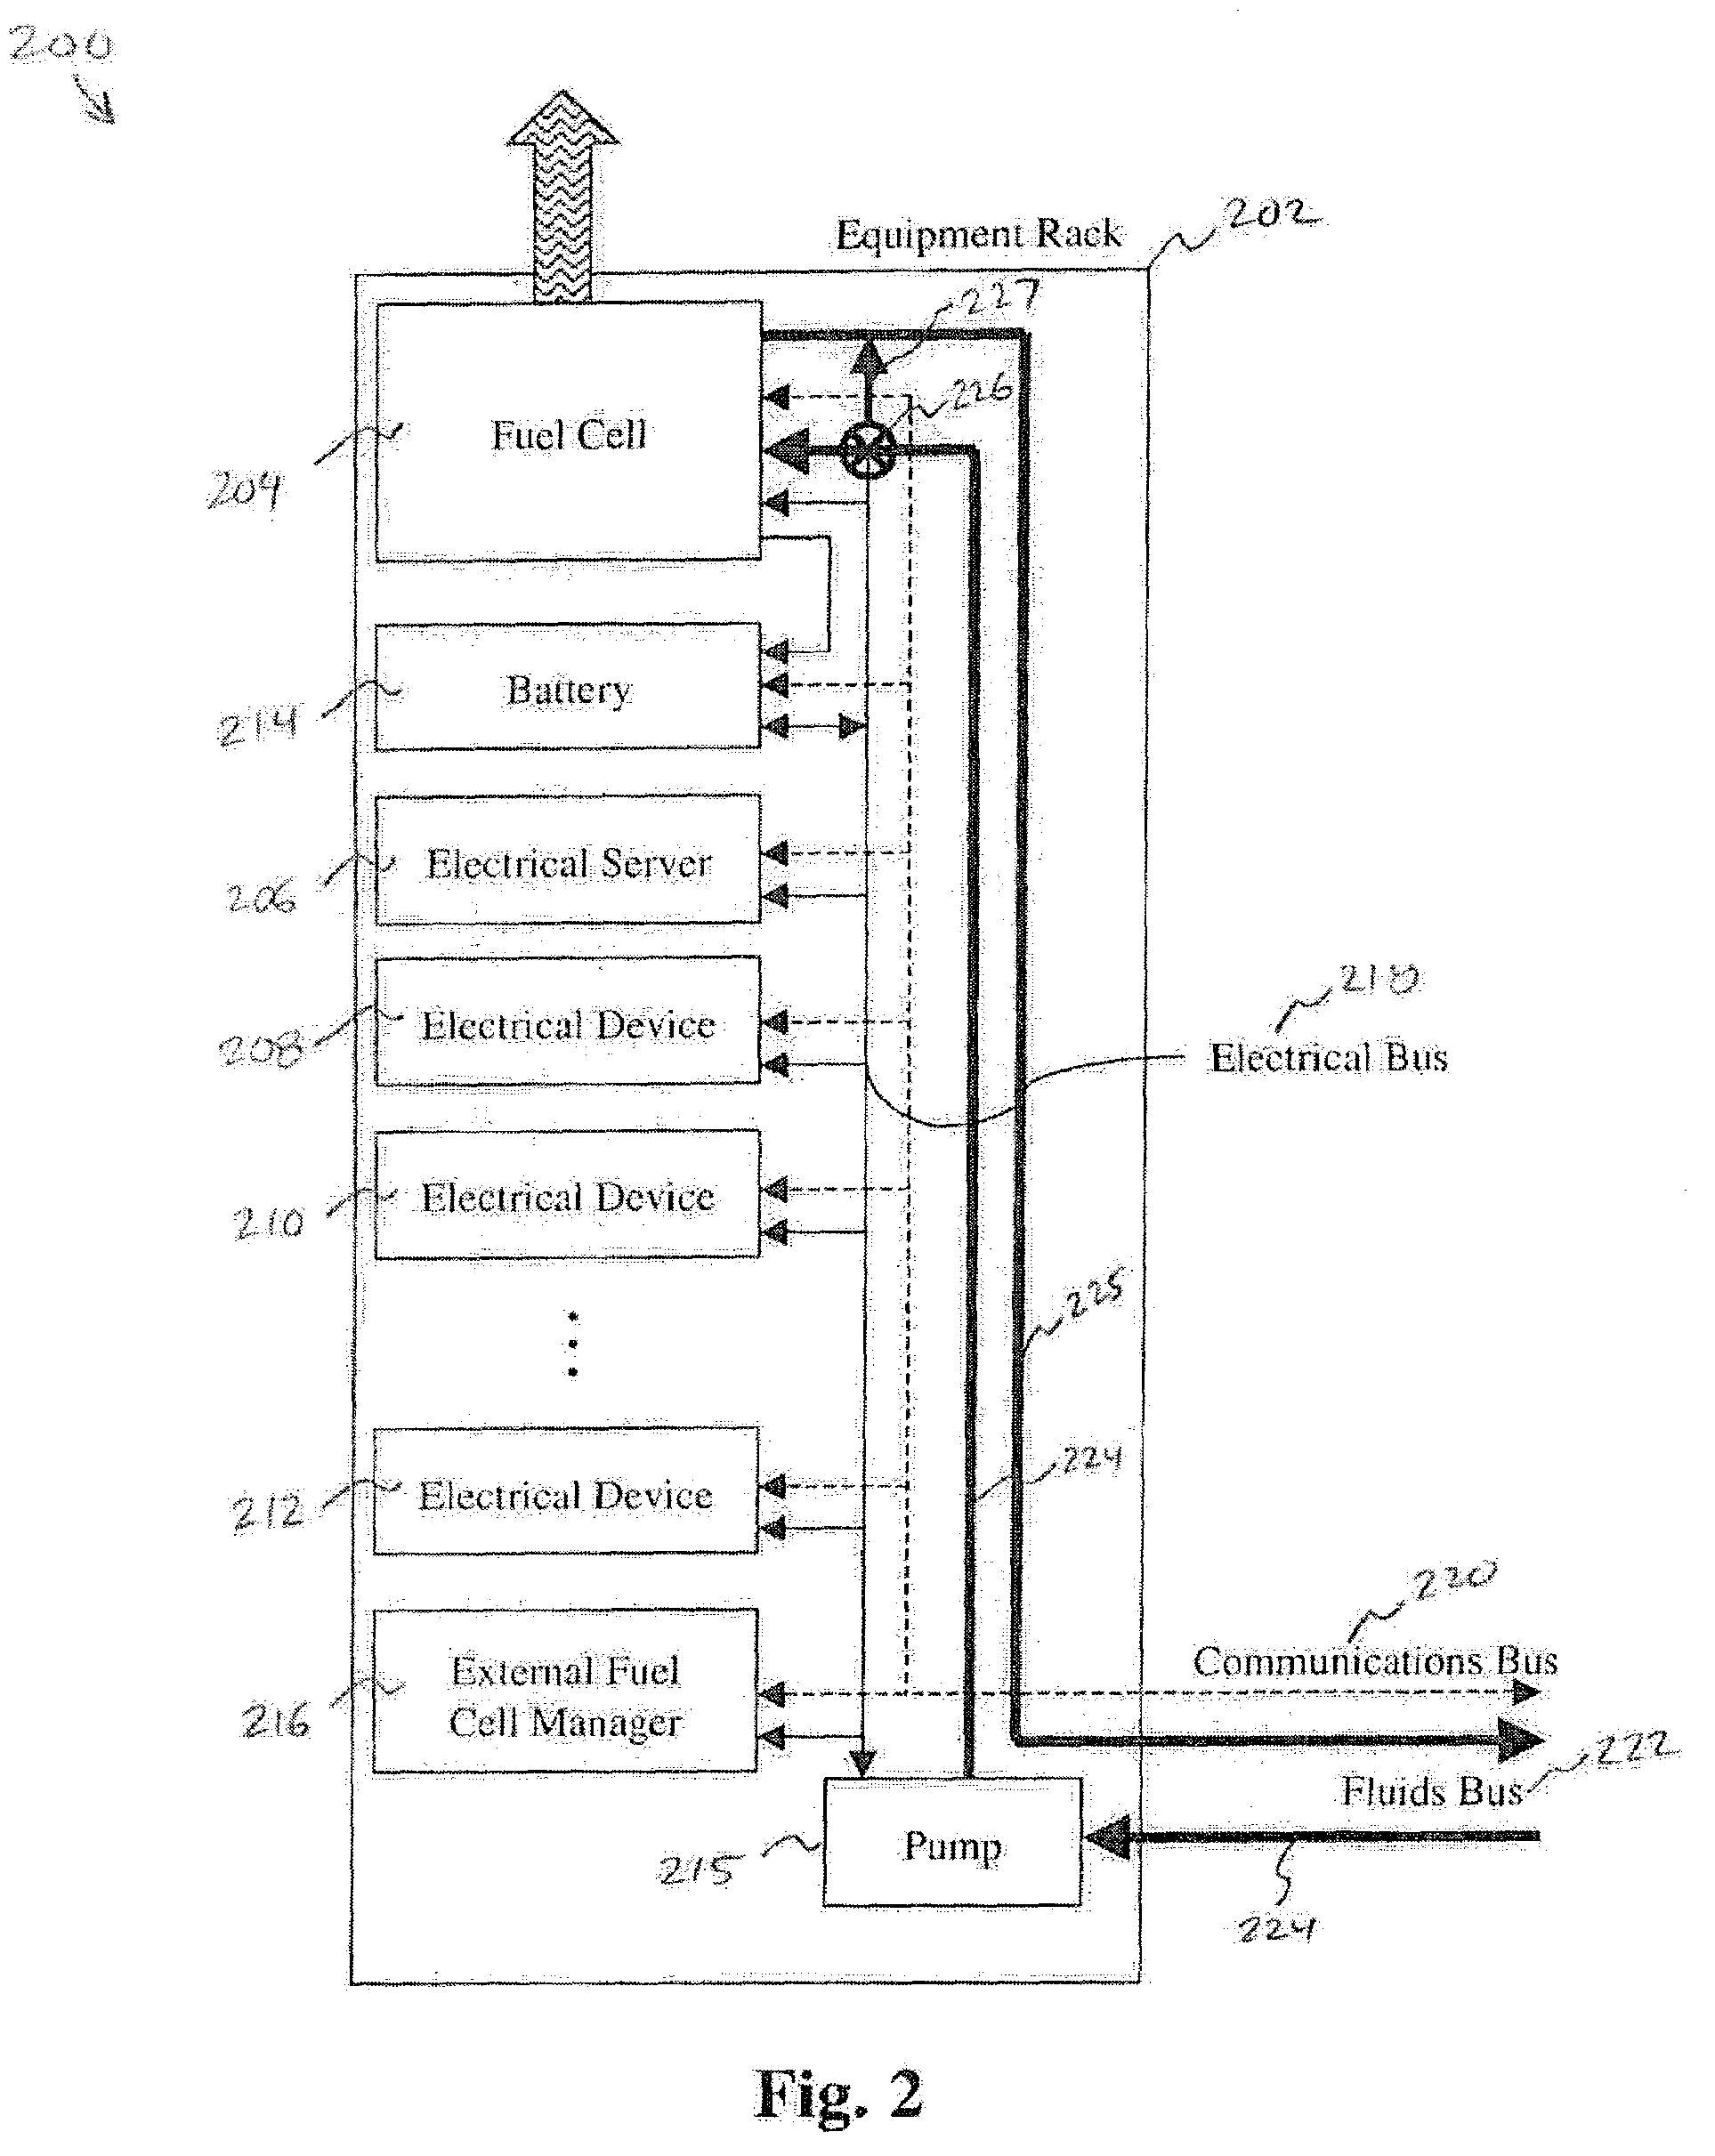 System and method for providing electrical power to an equipment rack using a fuel cell